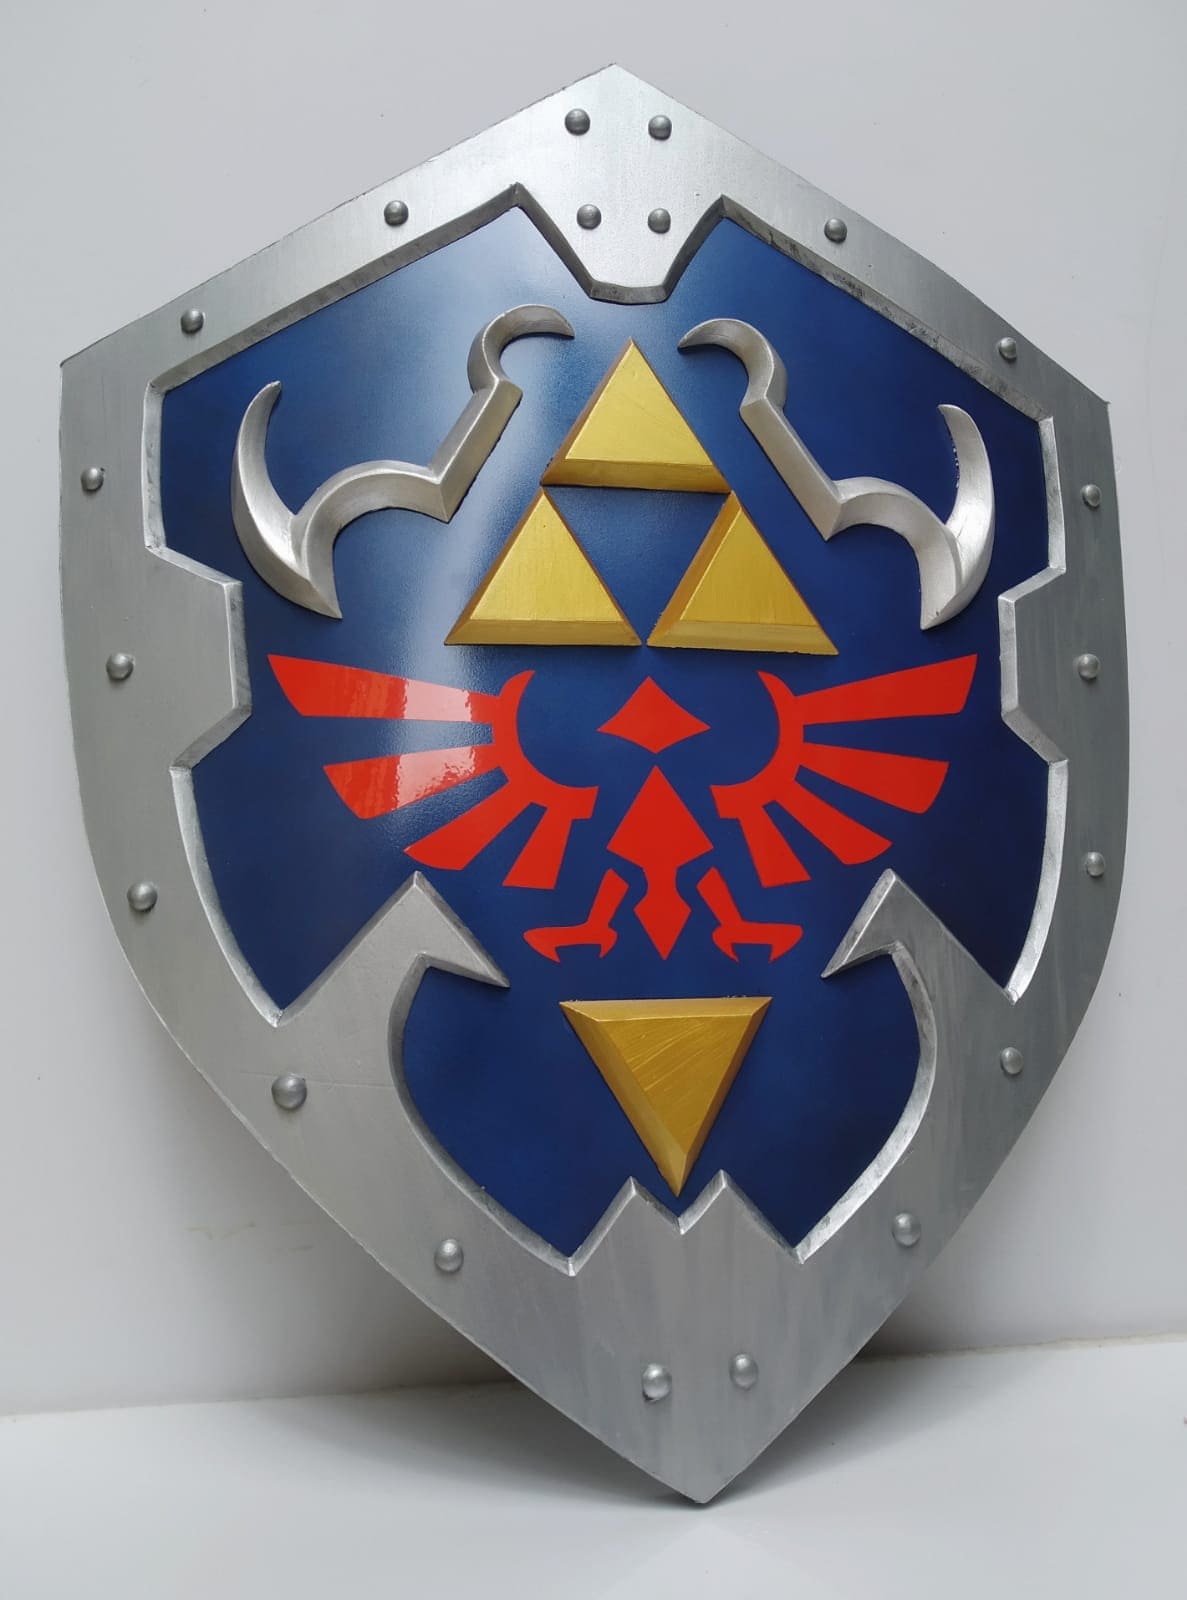 Hylian Shield Ocarina of Time Game Version, From the Legend of